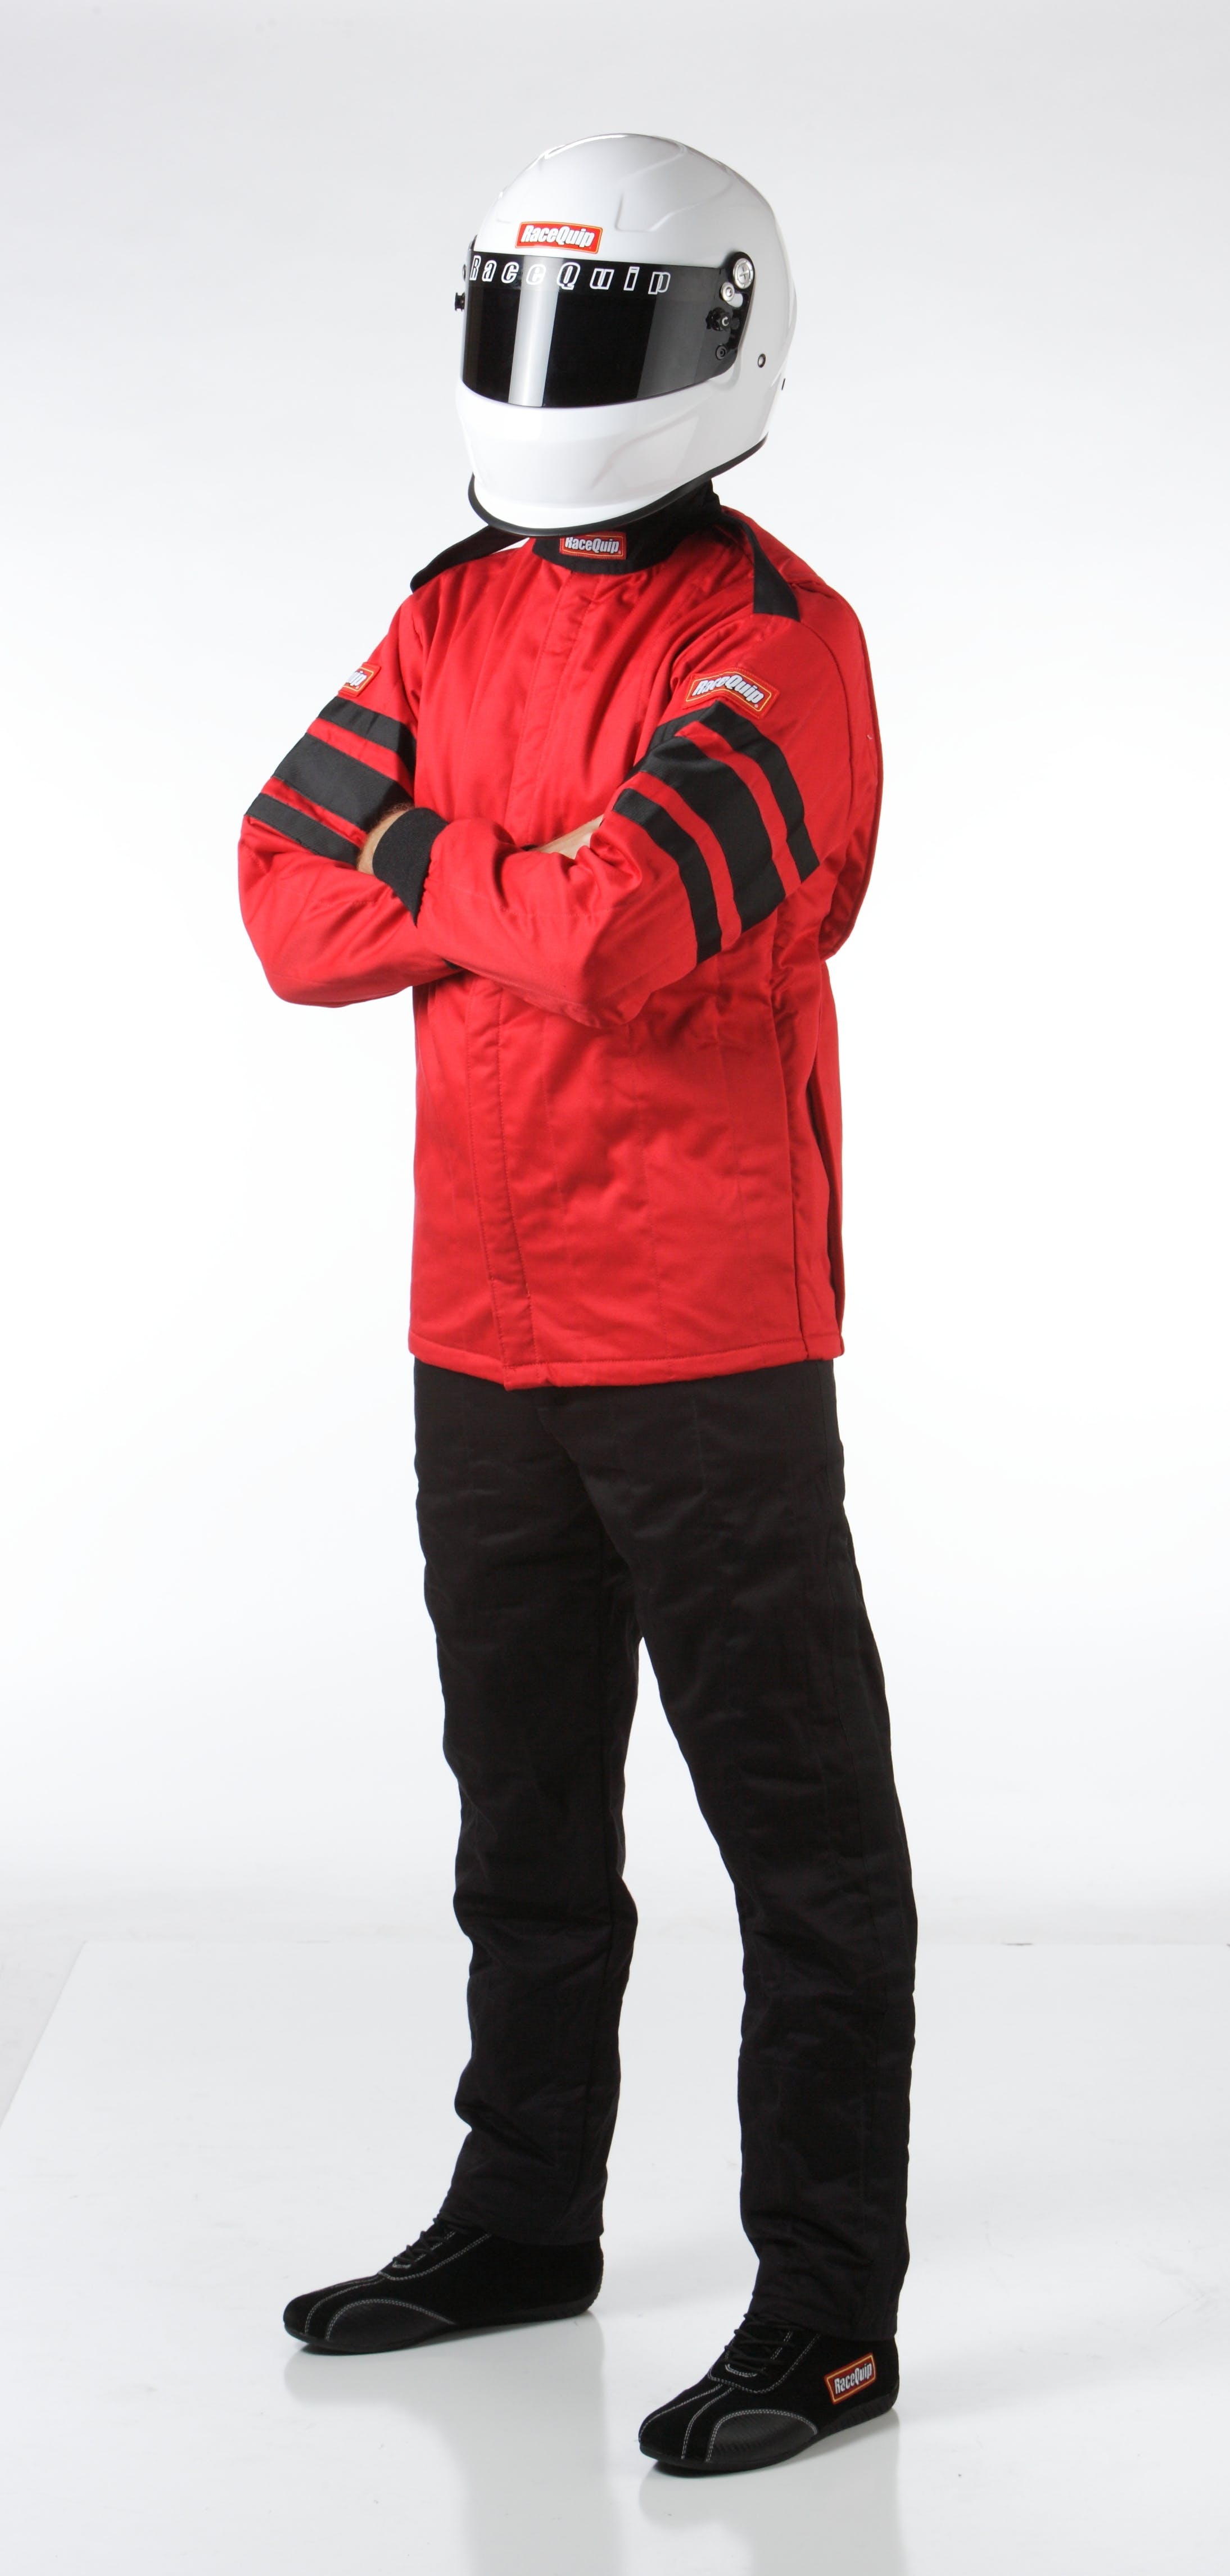 RaceQuip 121012 SFI-5 Pyrovatex Multi-Layer Racing Fire Jacket (Red, Small)